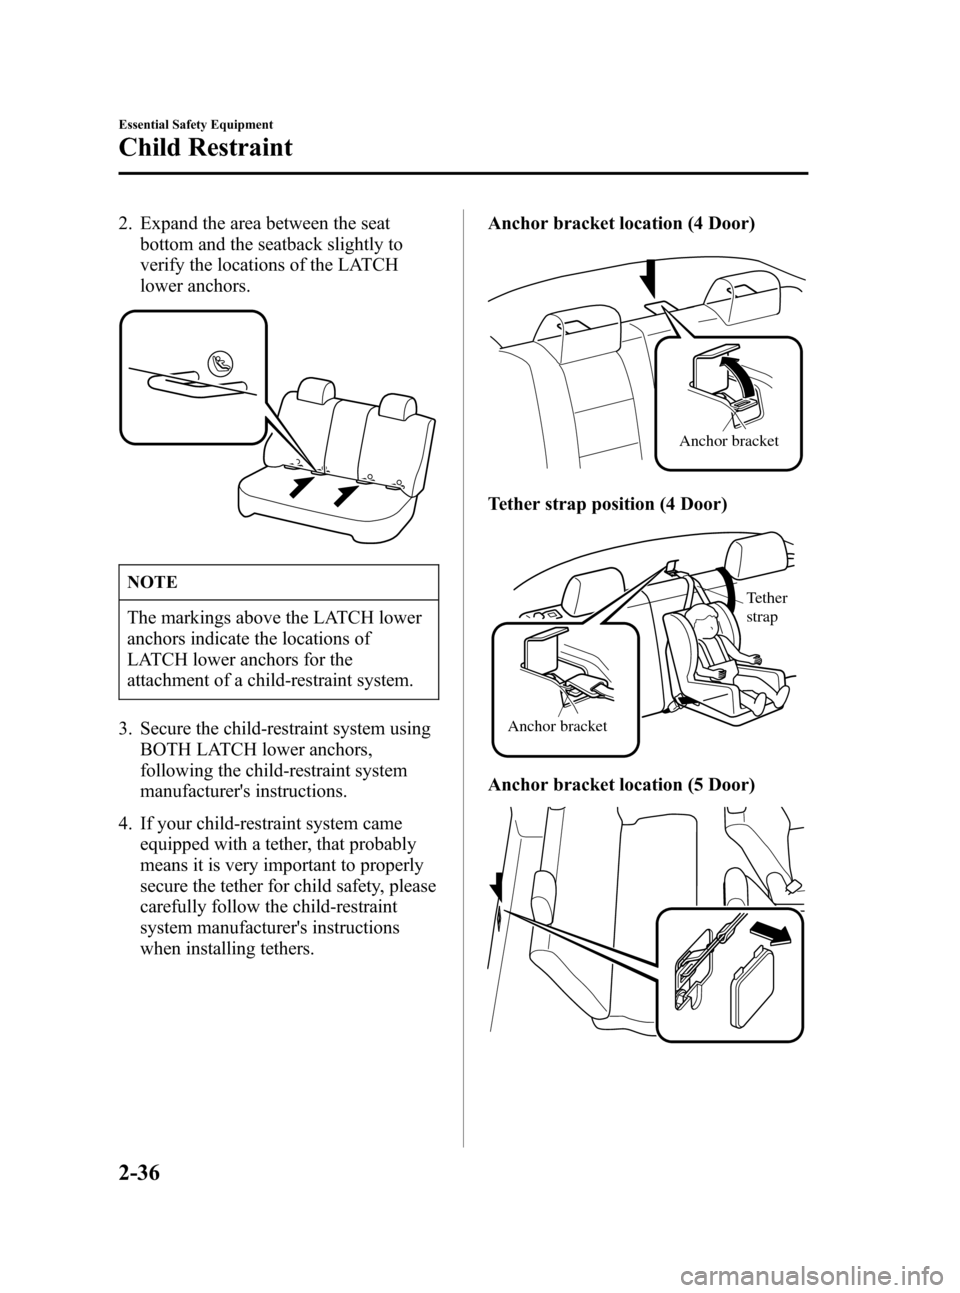 MAZDA MODEL 3 HATCHBACK 2006   (in English) Service Manual Black plate (50,1)
2. Expand the area between the seat
bottom and the seatback slightly to
verify the locations of the LATCH
lower anchors.
NOTE
The markings above the LATCH lower
anchors indicate the